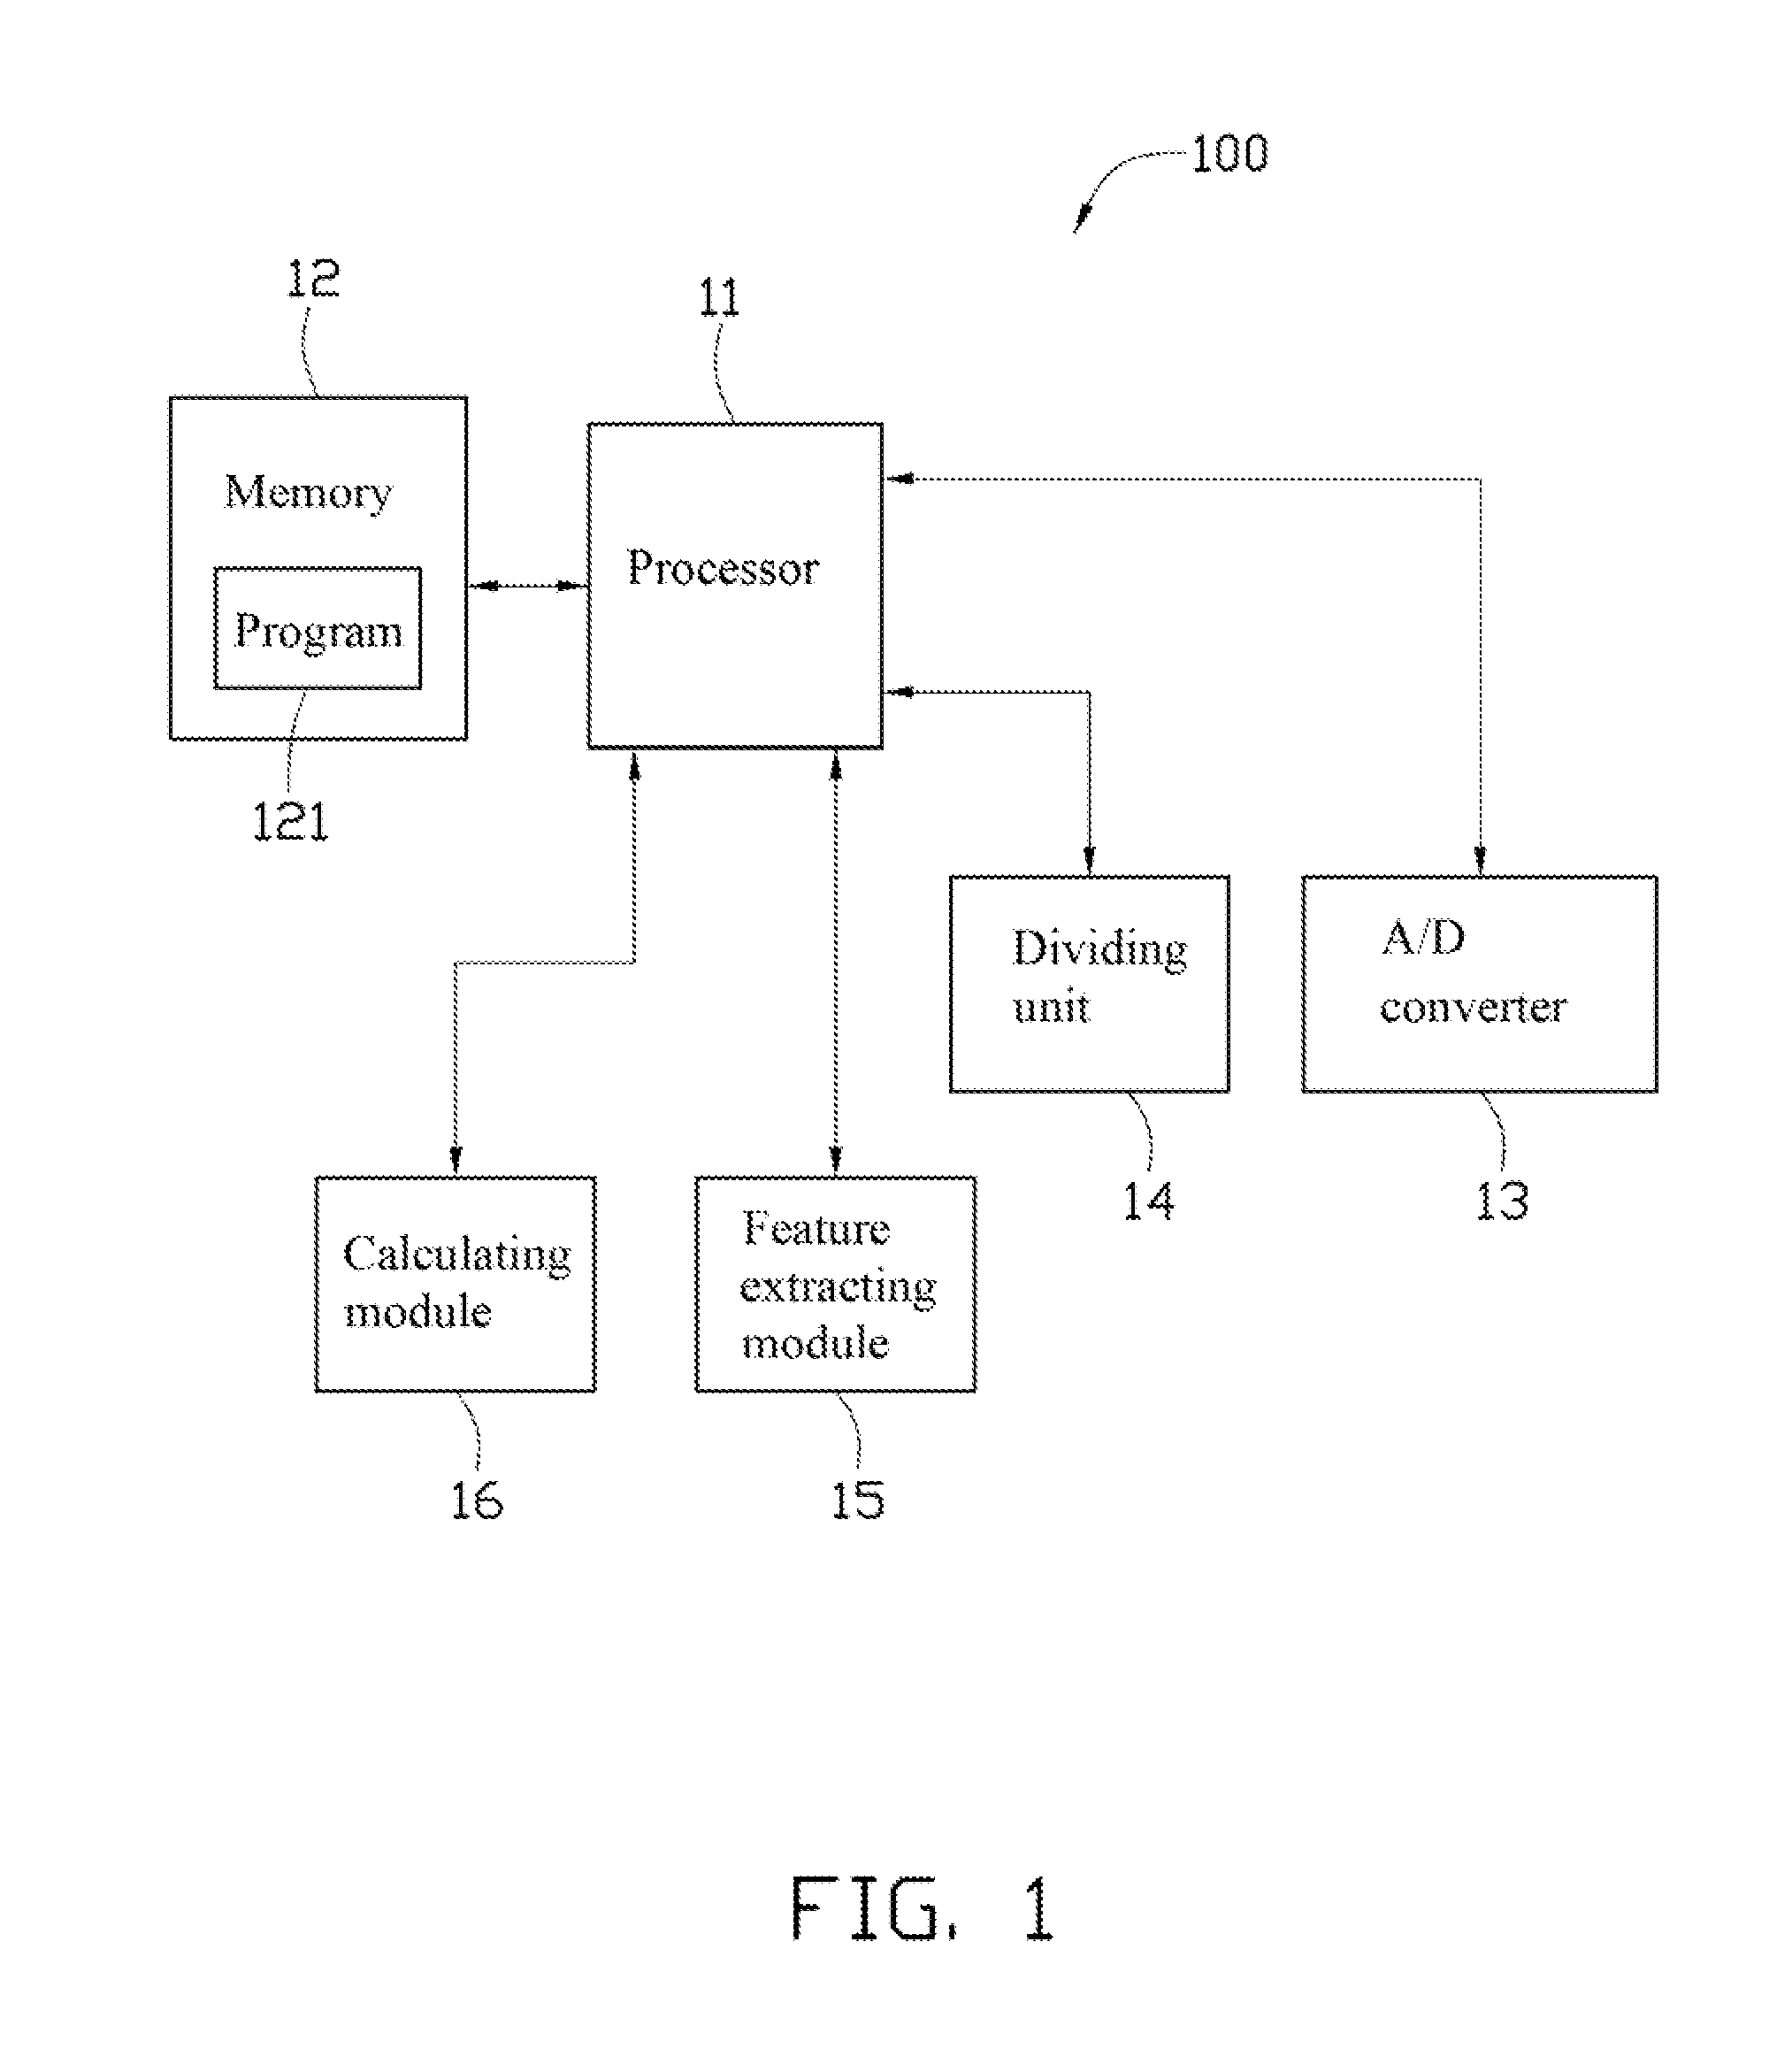 System and method of detecting abnormal segments of video